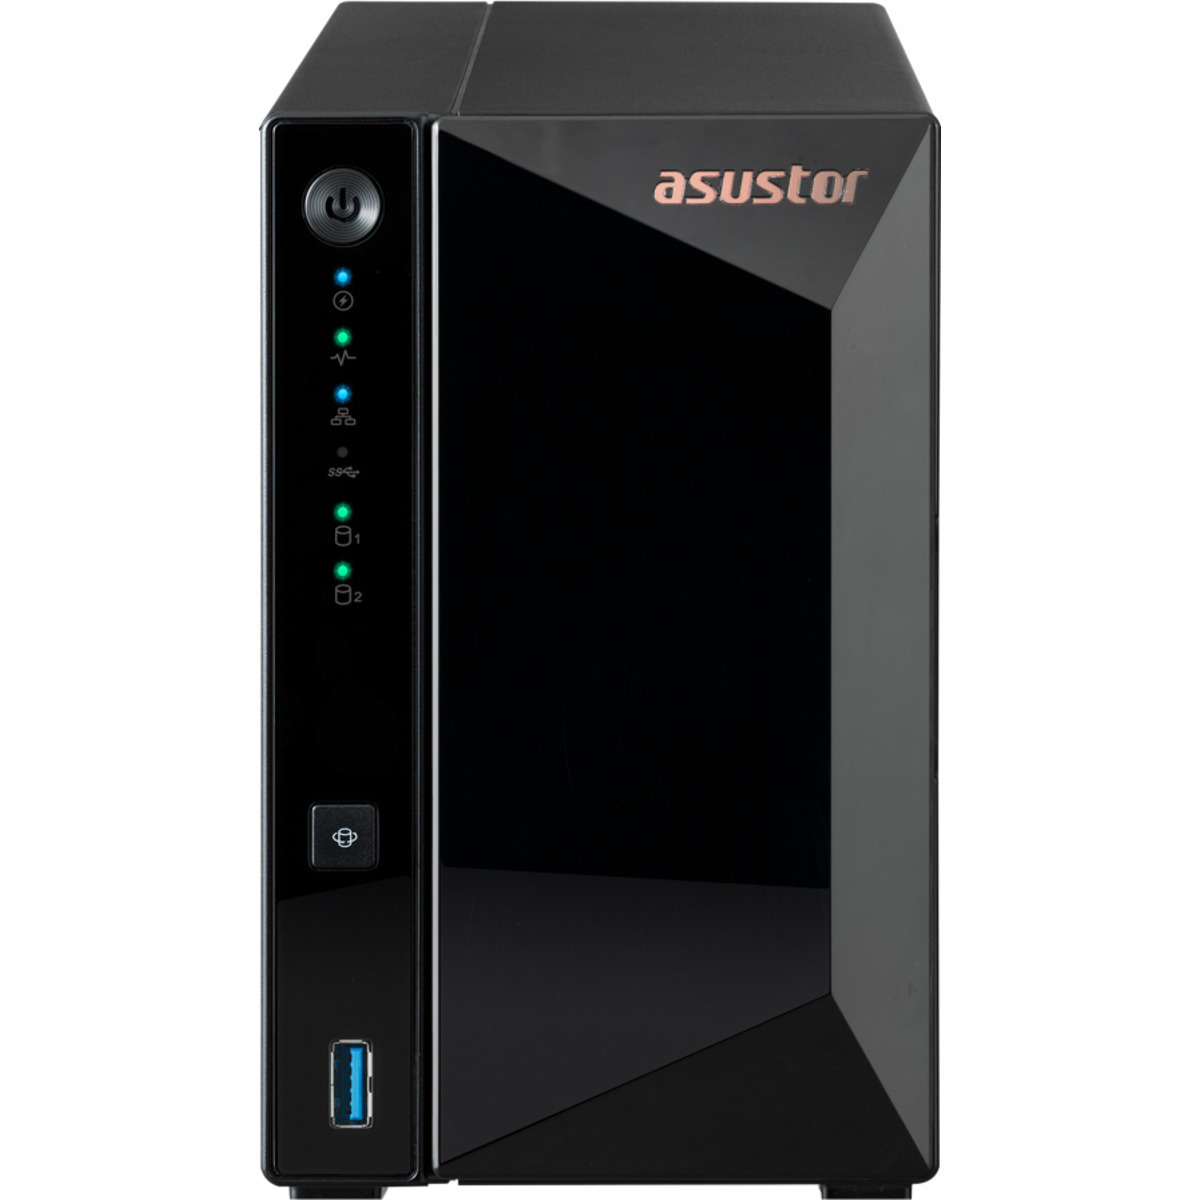 ASUSTOR DRIVESTOR 2 Pro AS3302T 24tb 2-Bay Desktop Personal / Basic Home / Small Office NAS - Network Attached Storage Device 2x12tb Western Digital Ultrastar DC HC520 HUH721212ALE600 3.5 7200rpm SATA 6Gb/s HDD ENTERPRISE Class Drives Installed - Burn-In Tested DRIVESTOR 2 Pro AS3302T